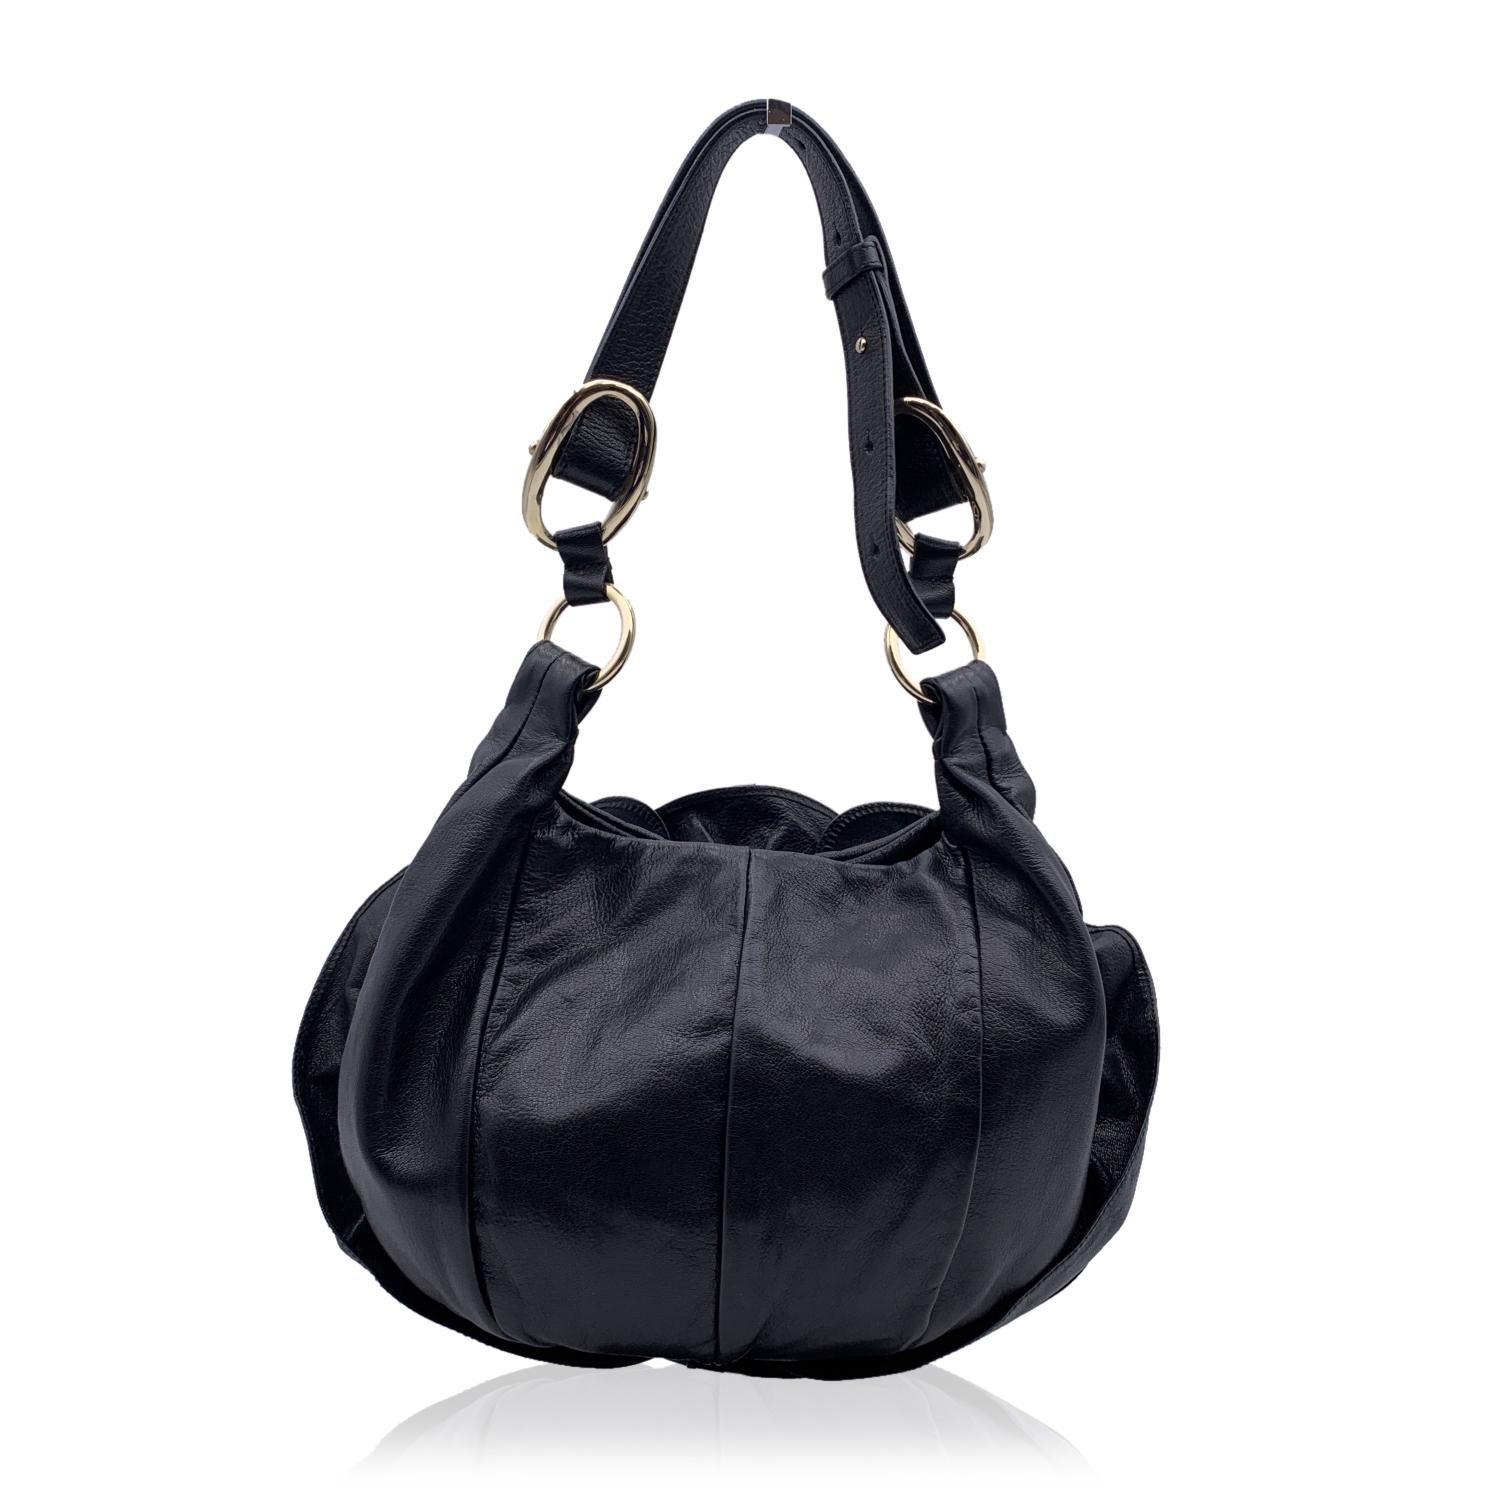 Yves Saint Laurent Black Ruffled Leather Hobo Shoulder Bag Tote In Excellent Condition In Rome, Rome